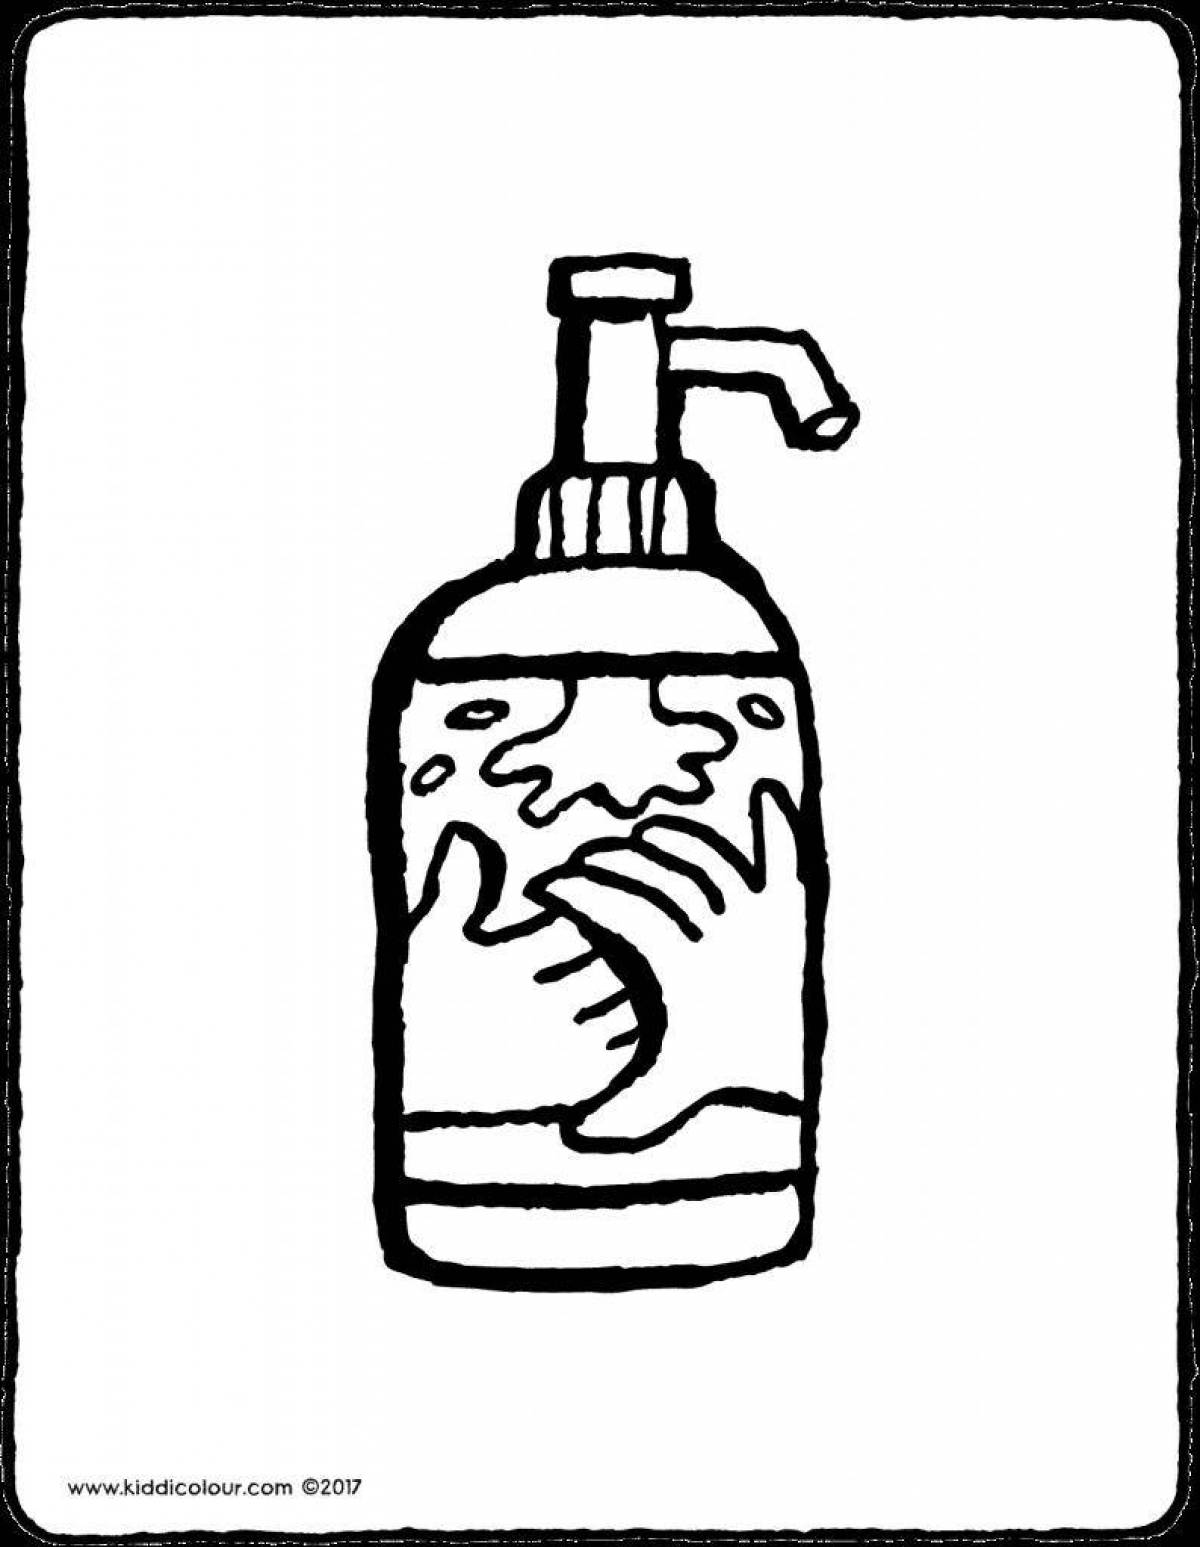 Amazing soap coloring page for 3-4 year olds